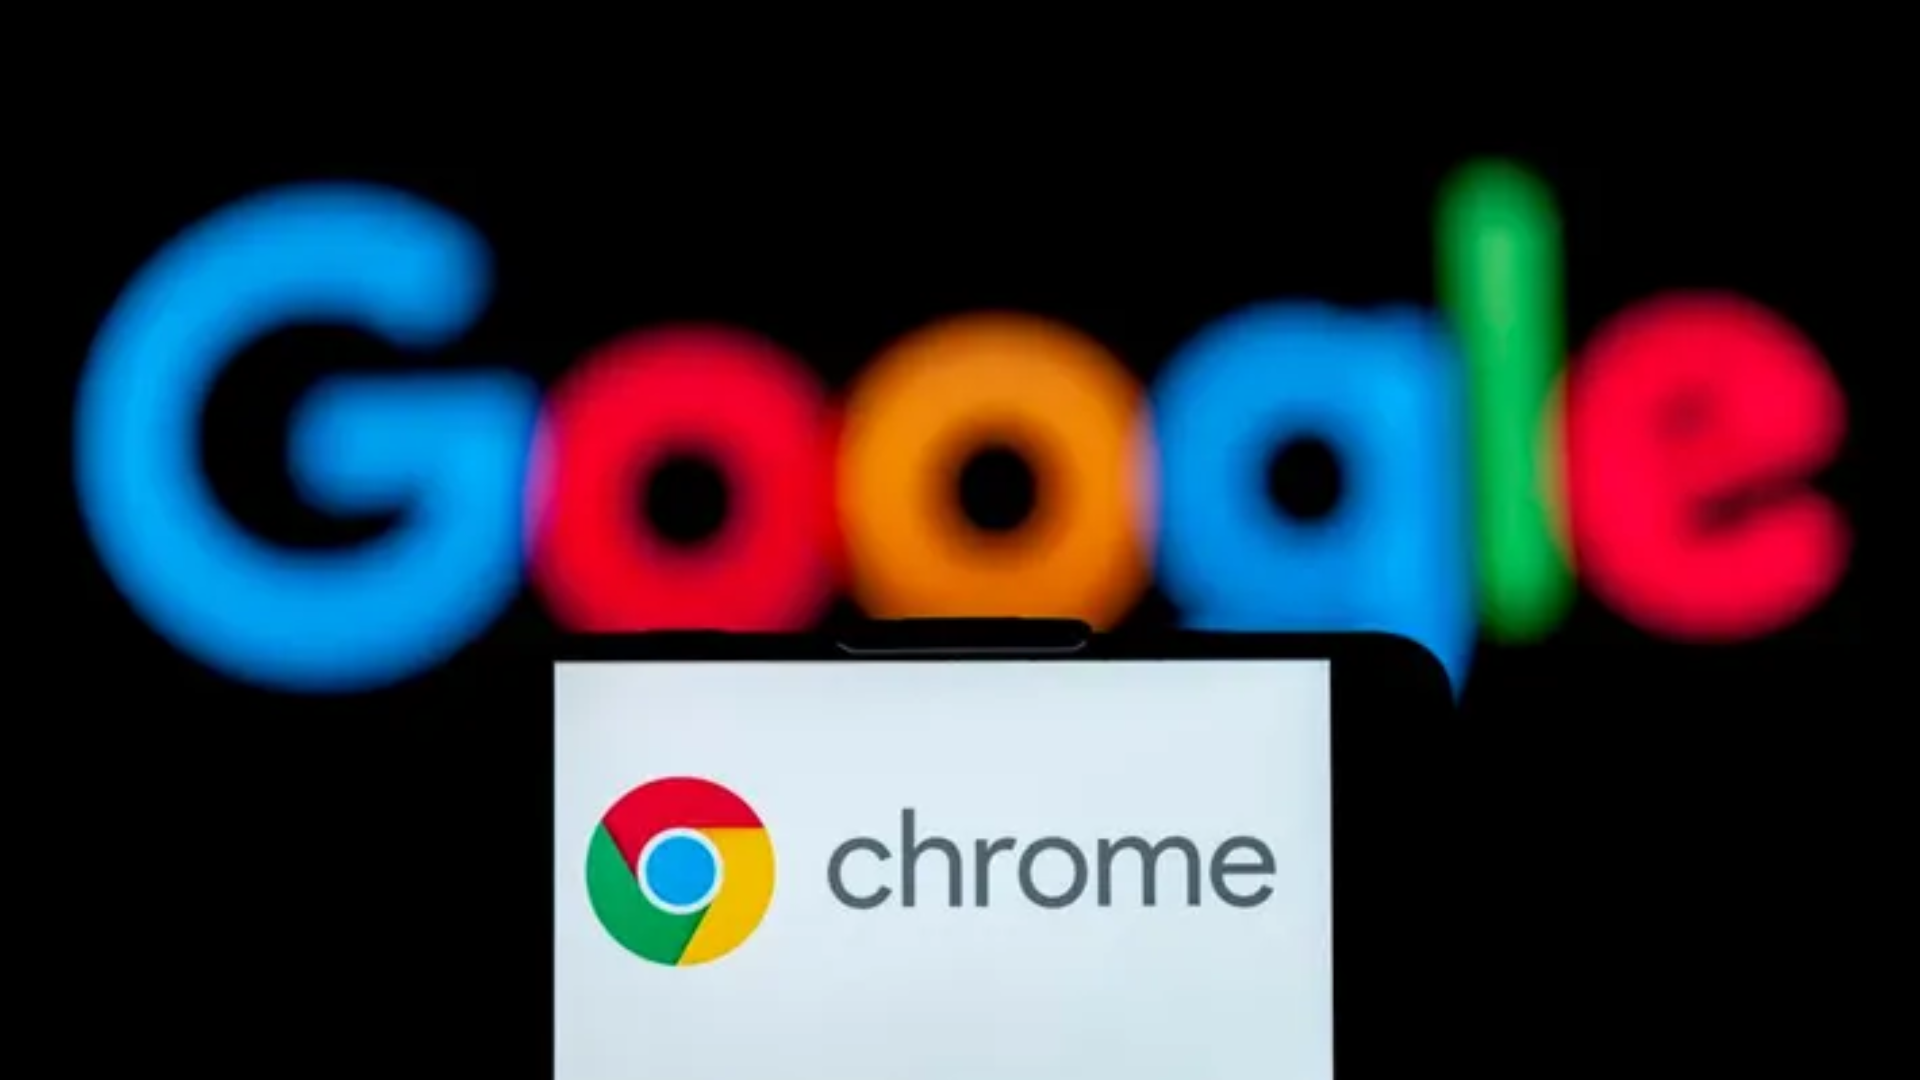 Government Issues Urgent Warning For Google Chrome Users: Update Now!